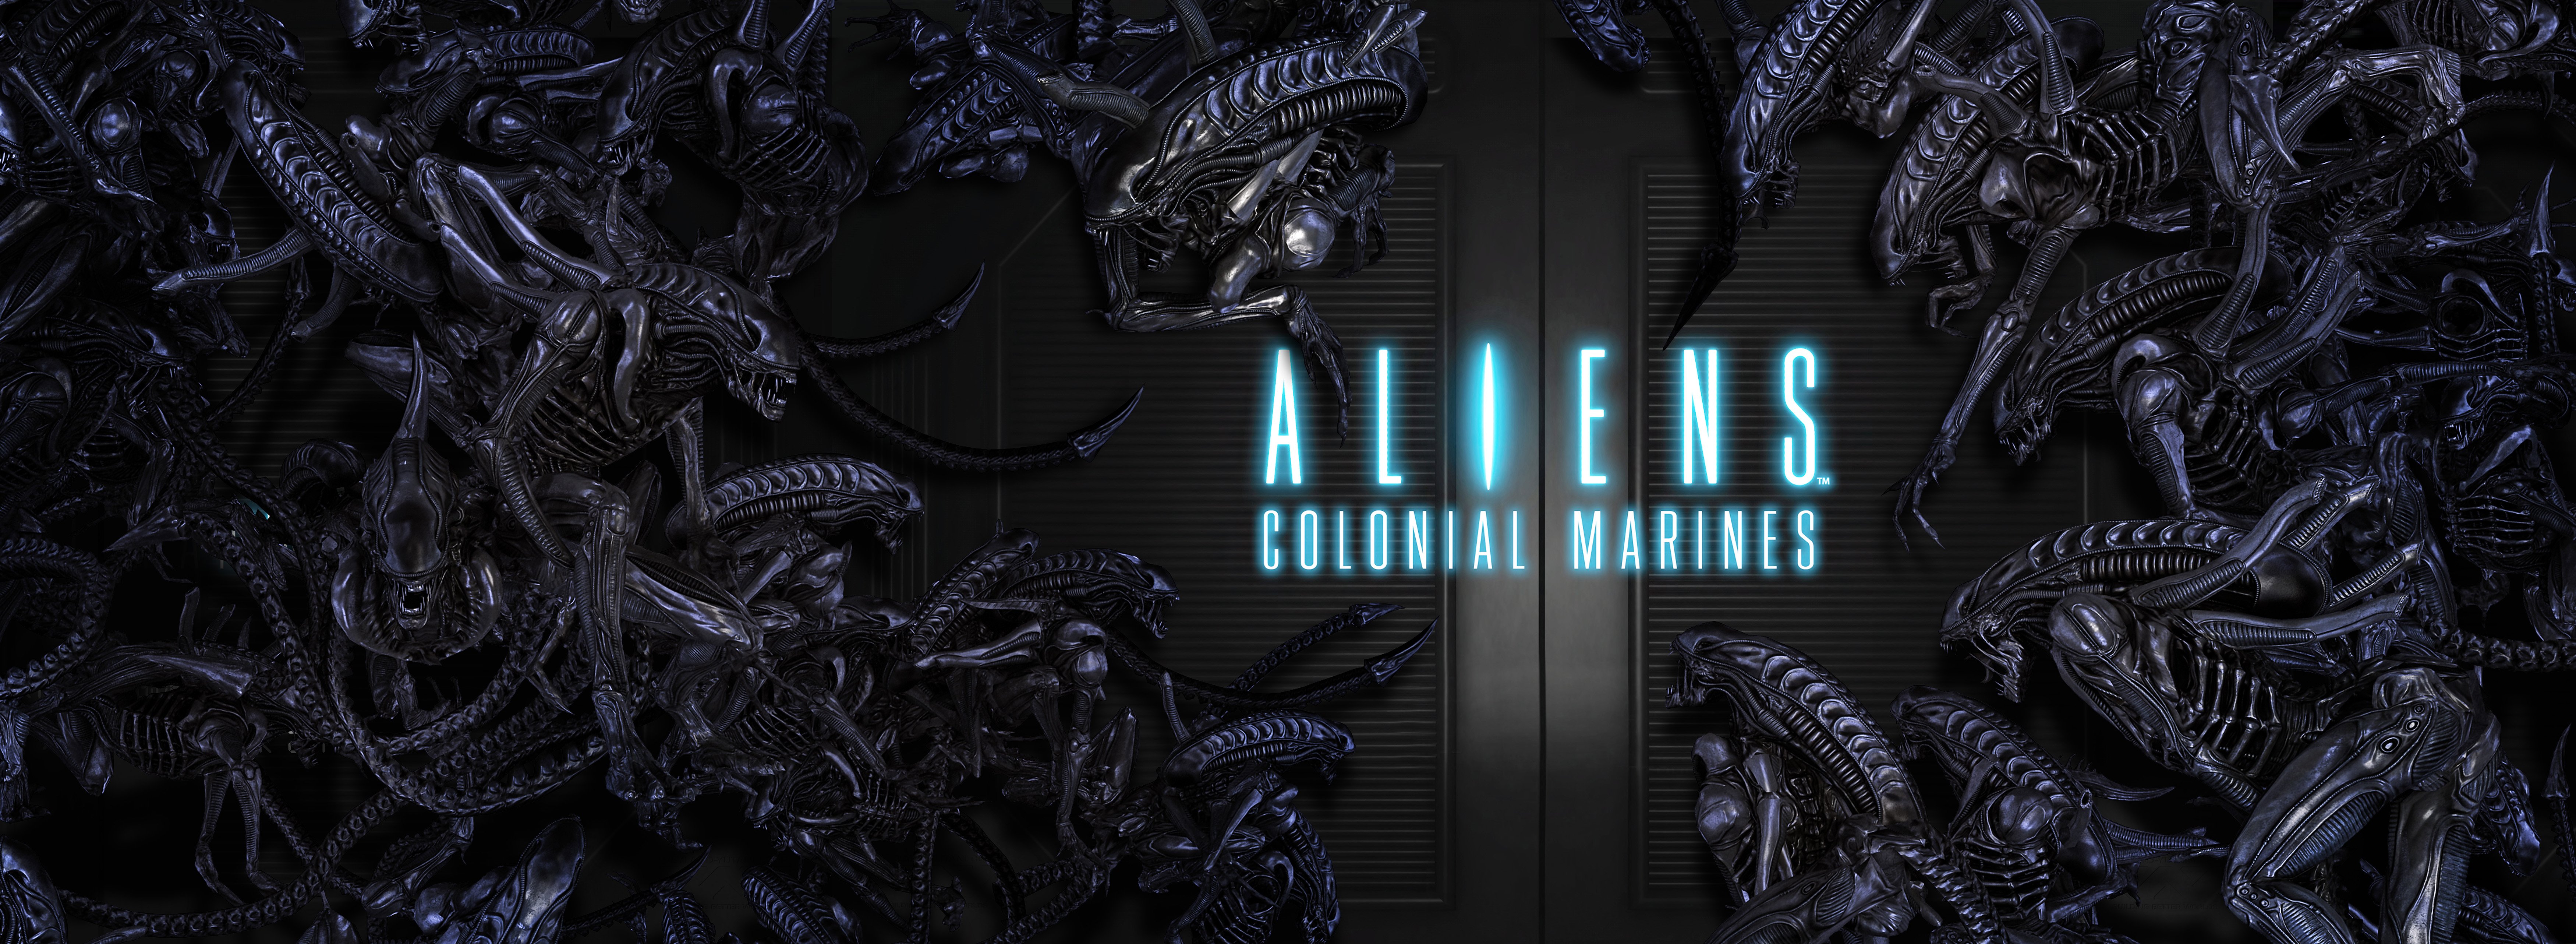 aliens, Colonial, Marines, Sci fi, Action, Shooter, Fighting, Alien, Futuristic, Poster Wallpaper